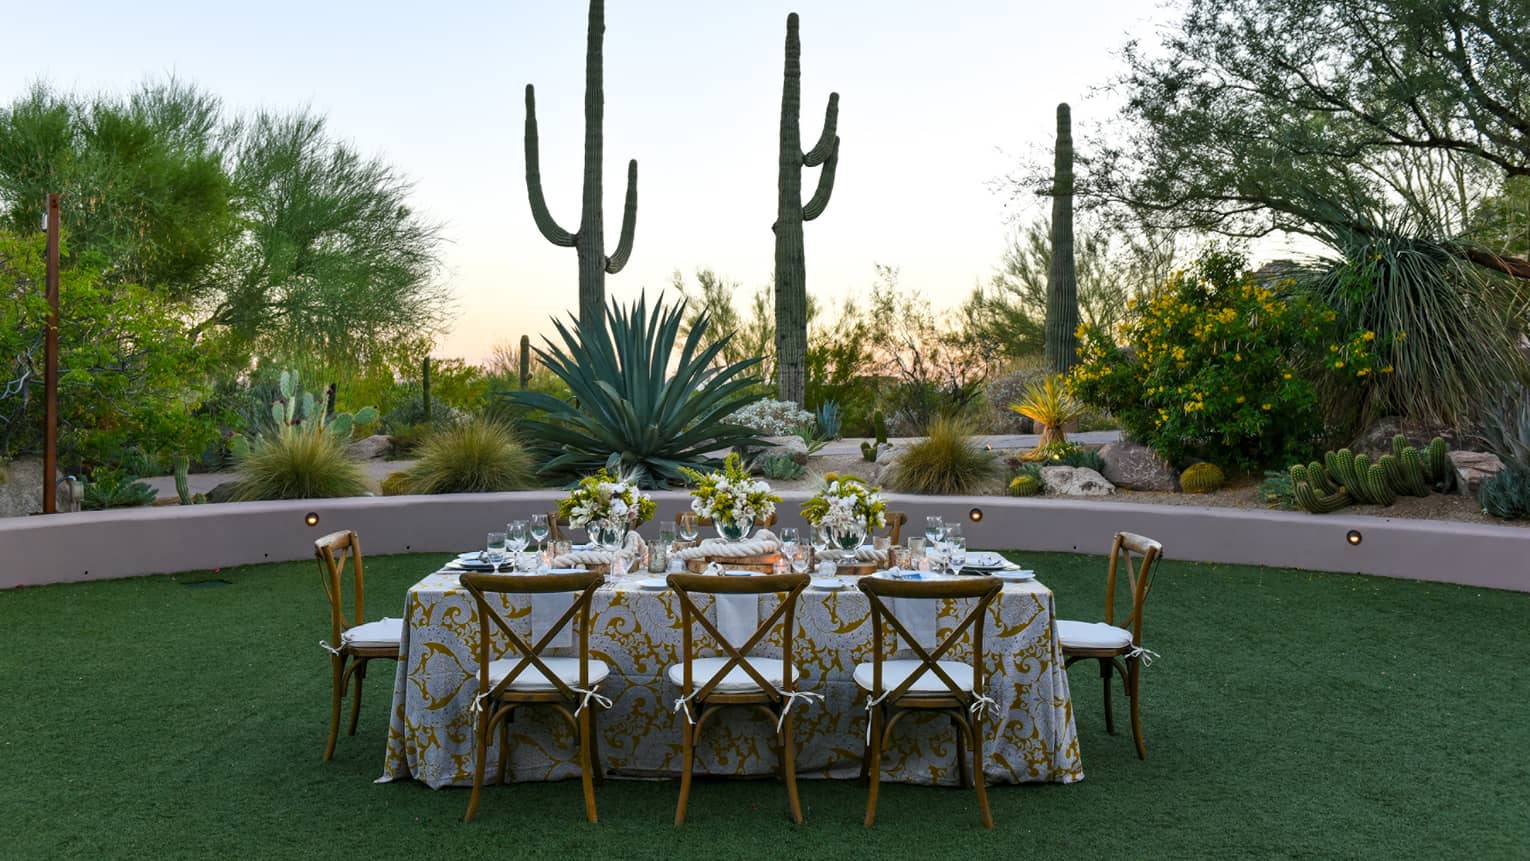 A rectangular table outside with a patterned cloth and wood chairs surrounded by cacti and trees.